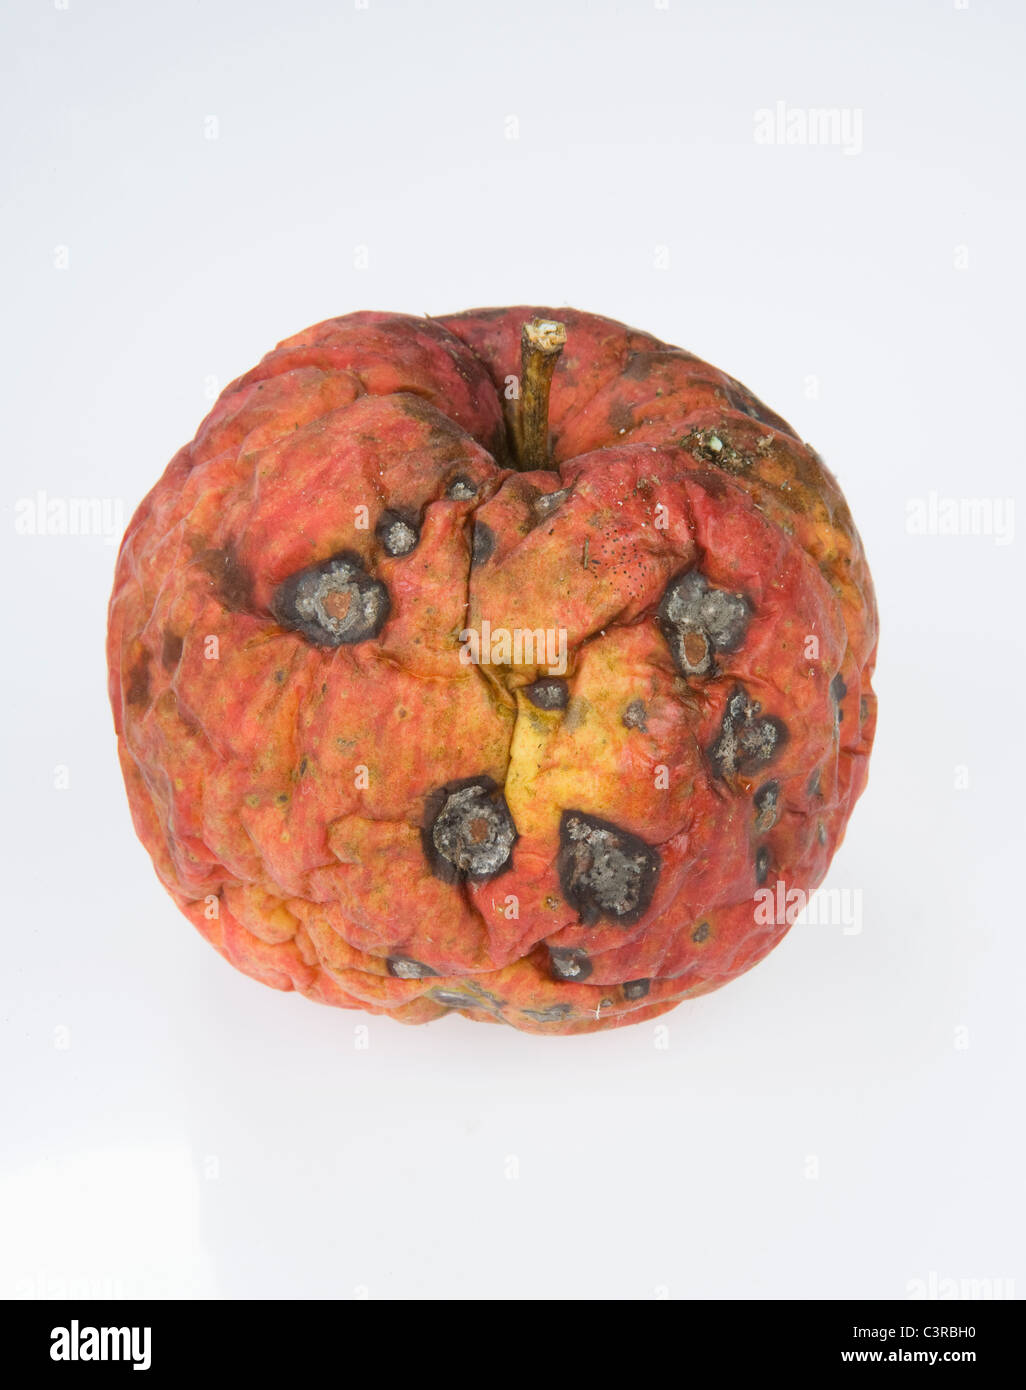 Rotten Apple - Stock Image - F003/9696 - Science Photo Library